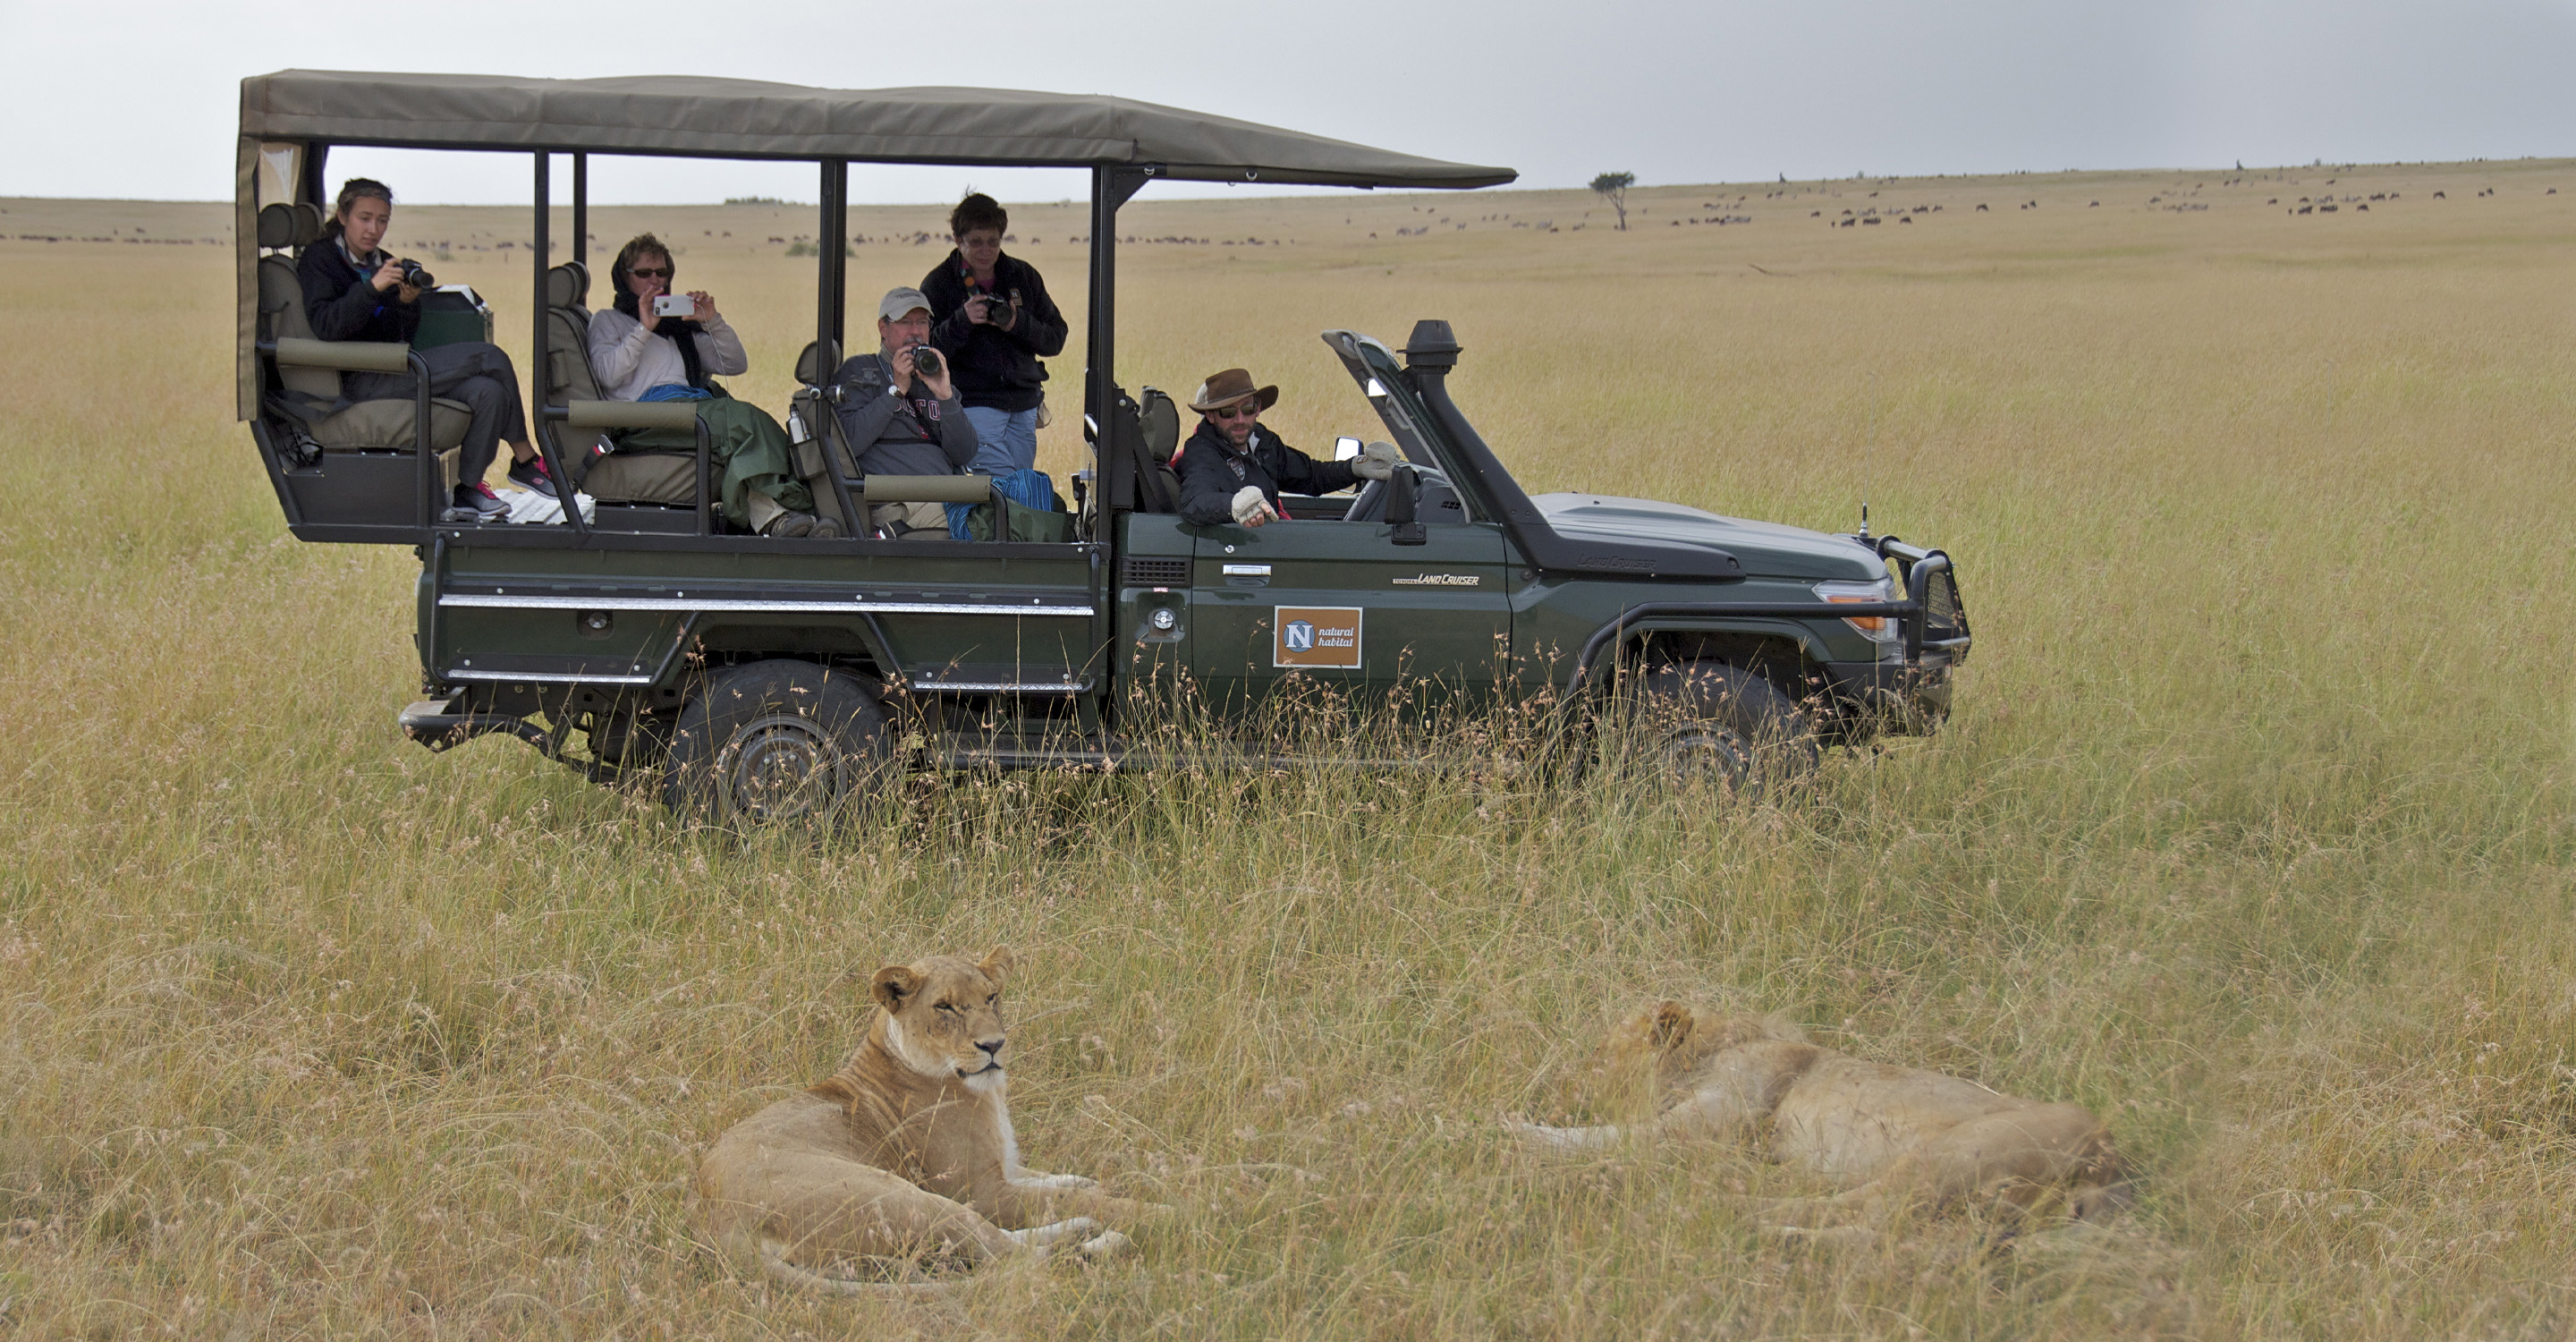 Natural Habitat Adventures travelers in a safari vehicle view two African lions relaxing in the grass of the Maasai Mara National Reserve, Kenya